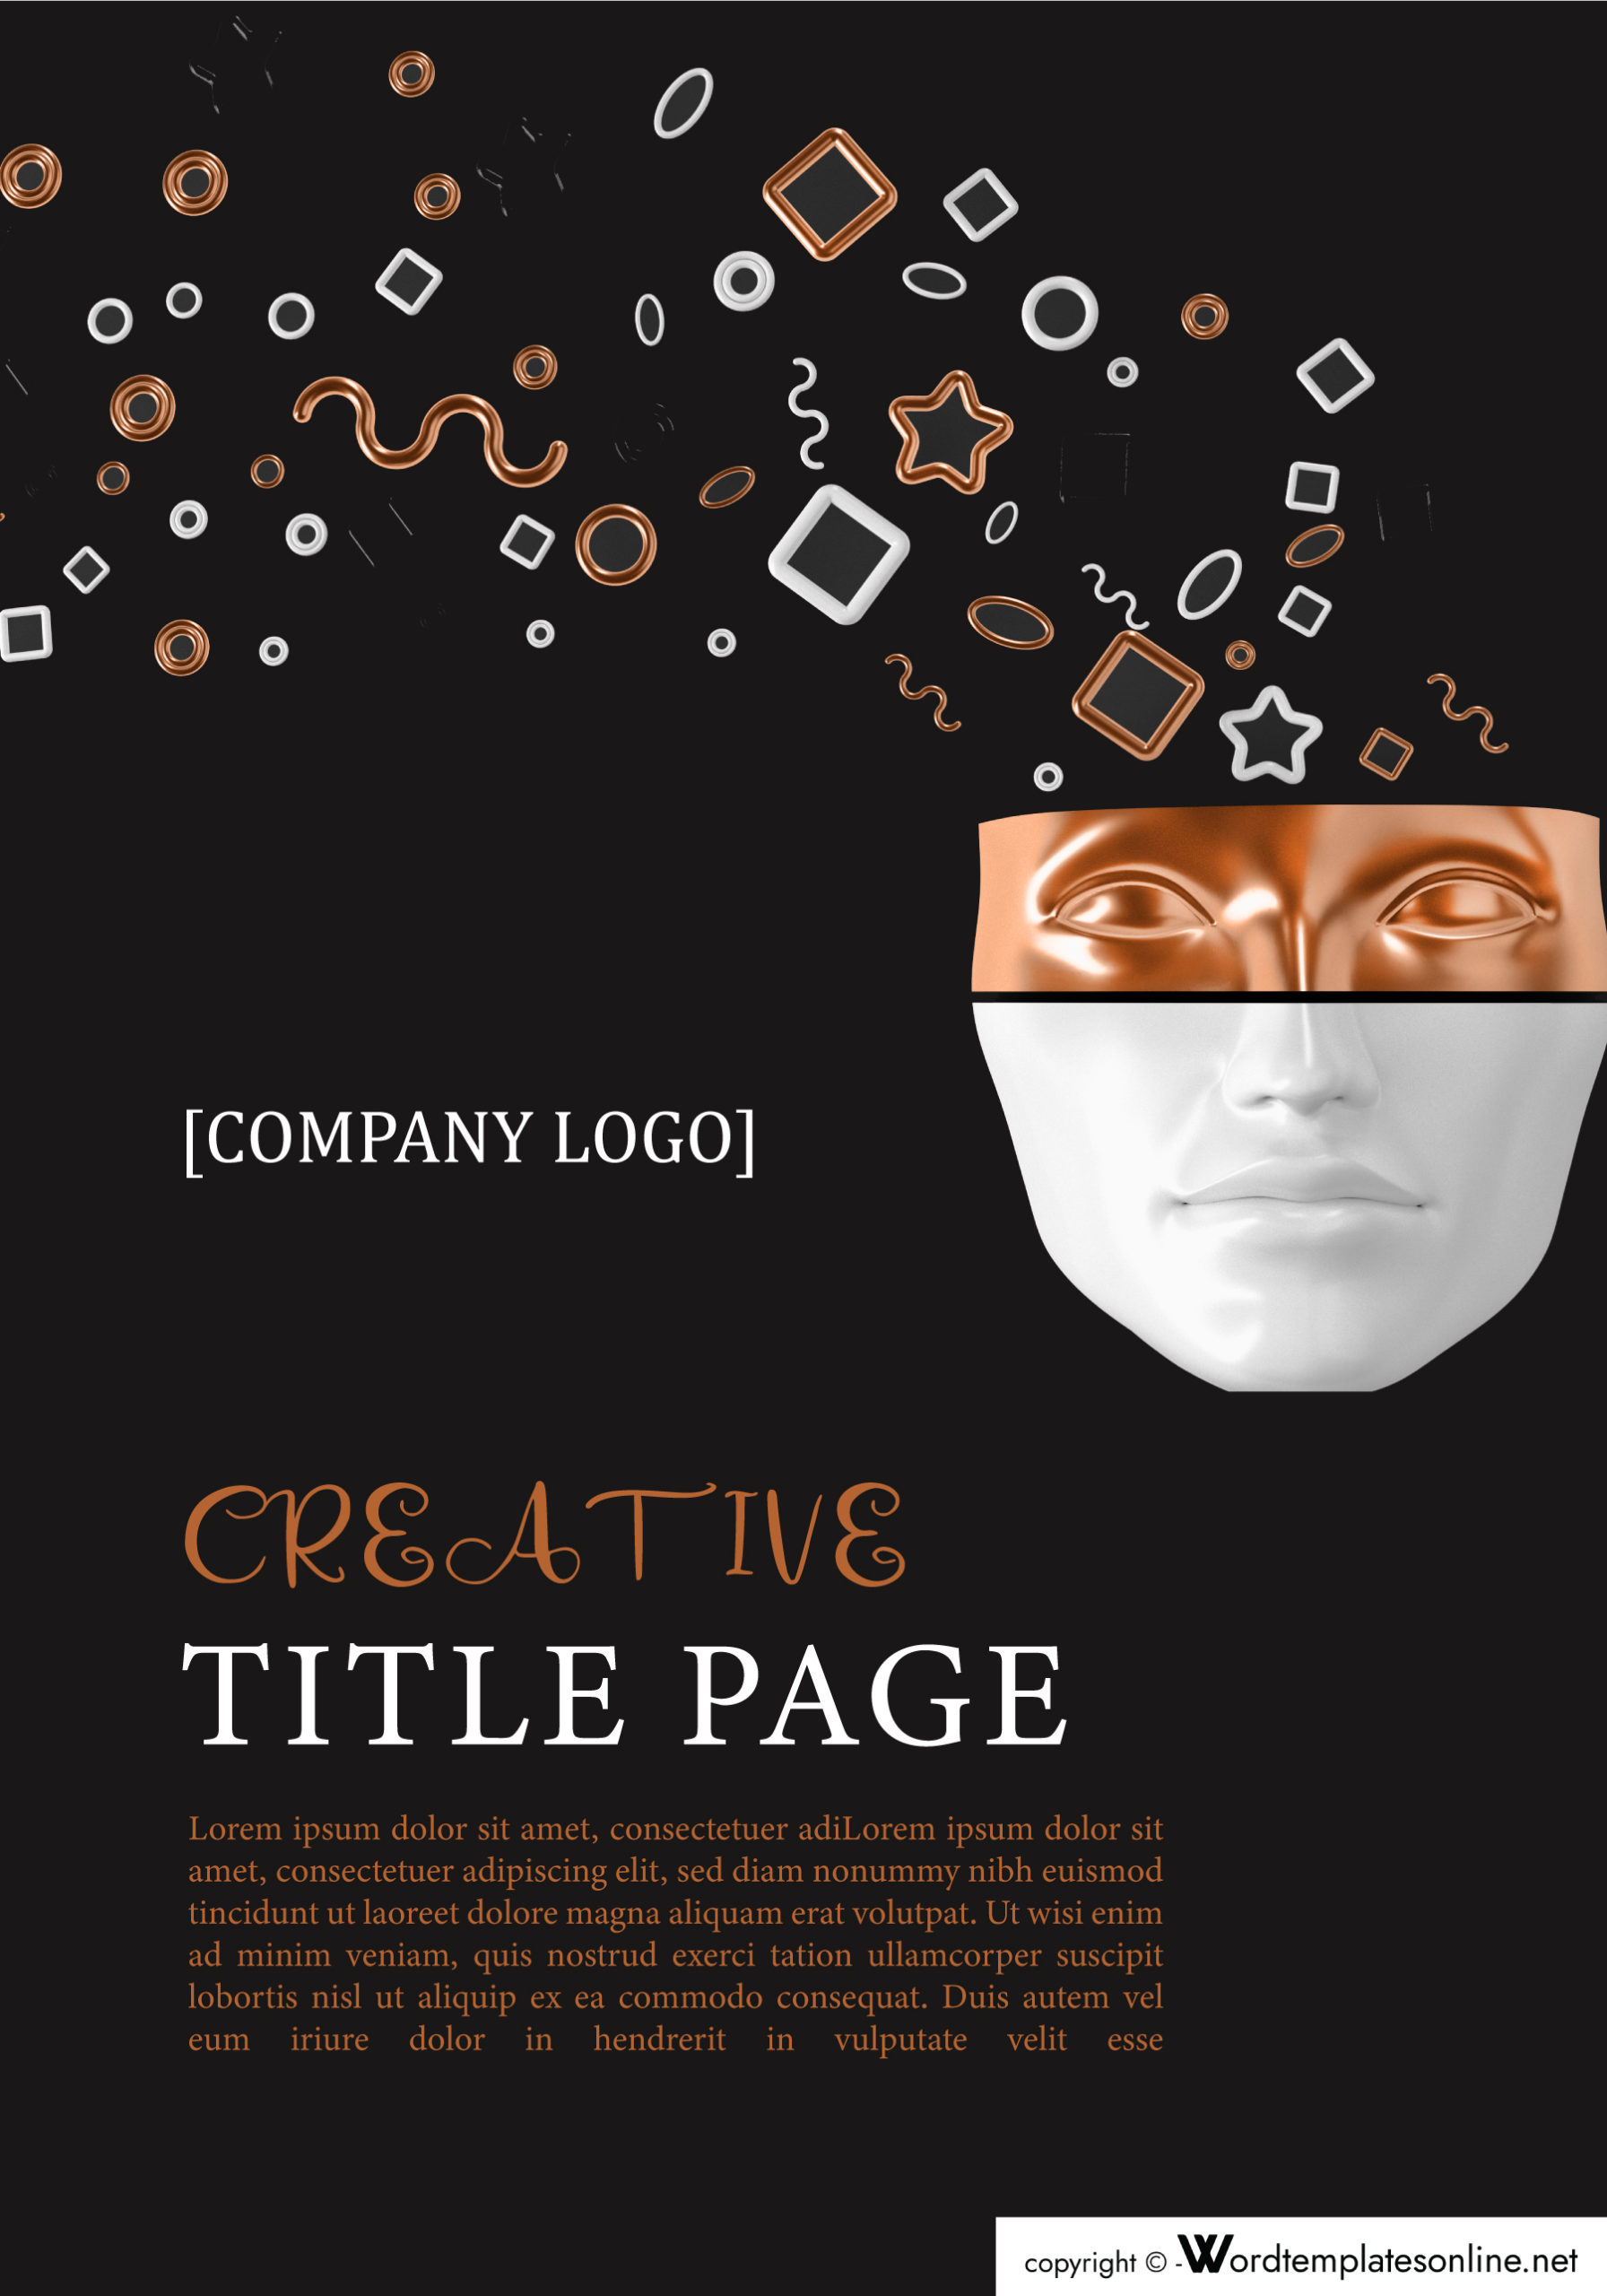 Creative Work Cover Page Design Sample - Free Download